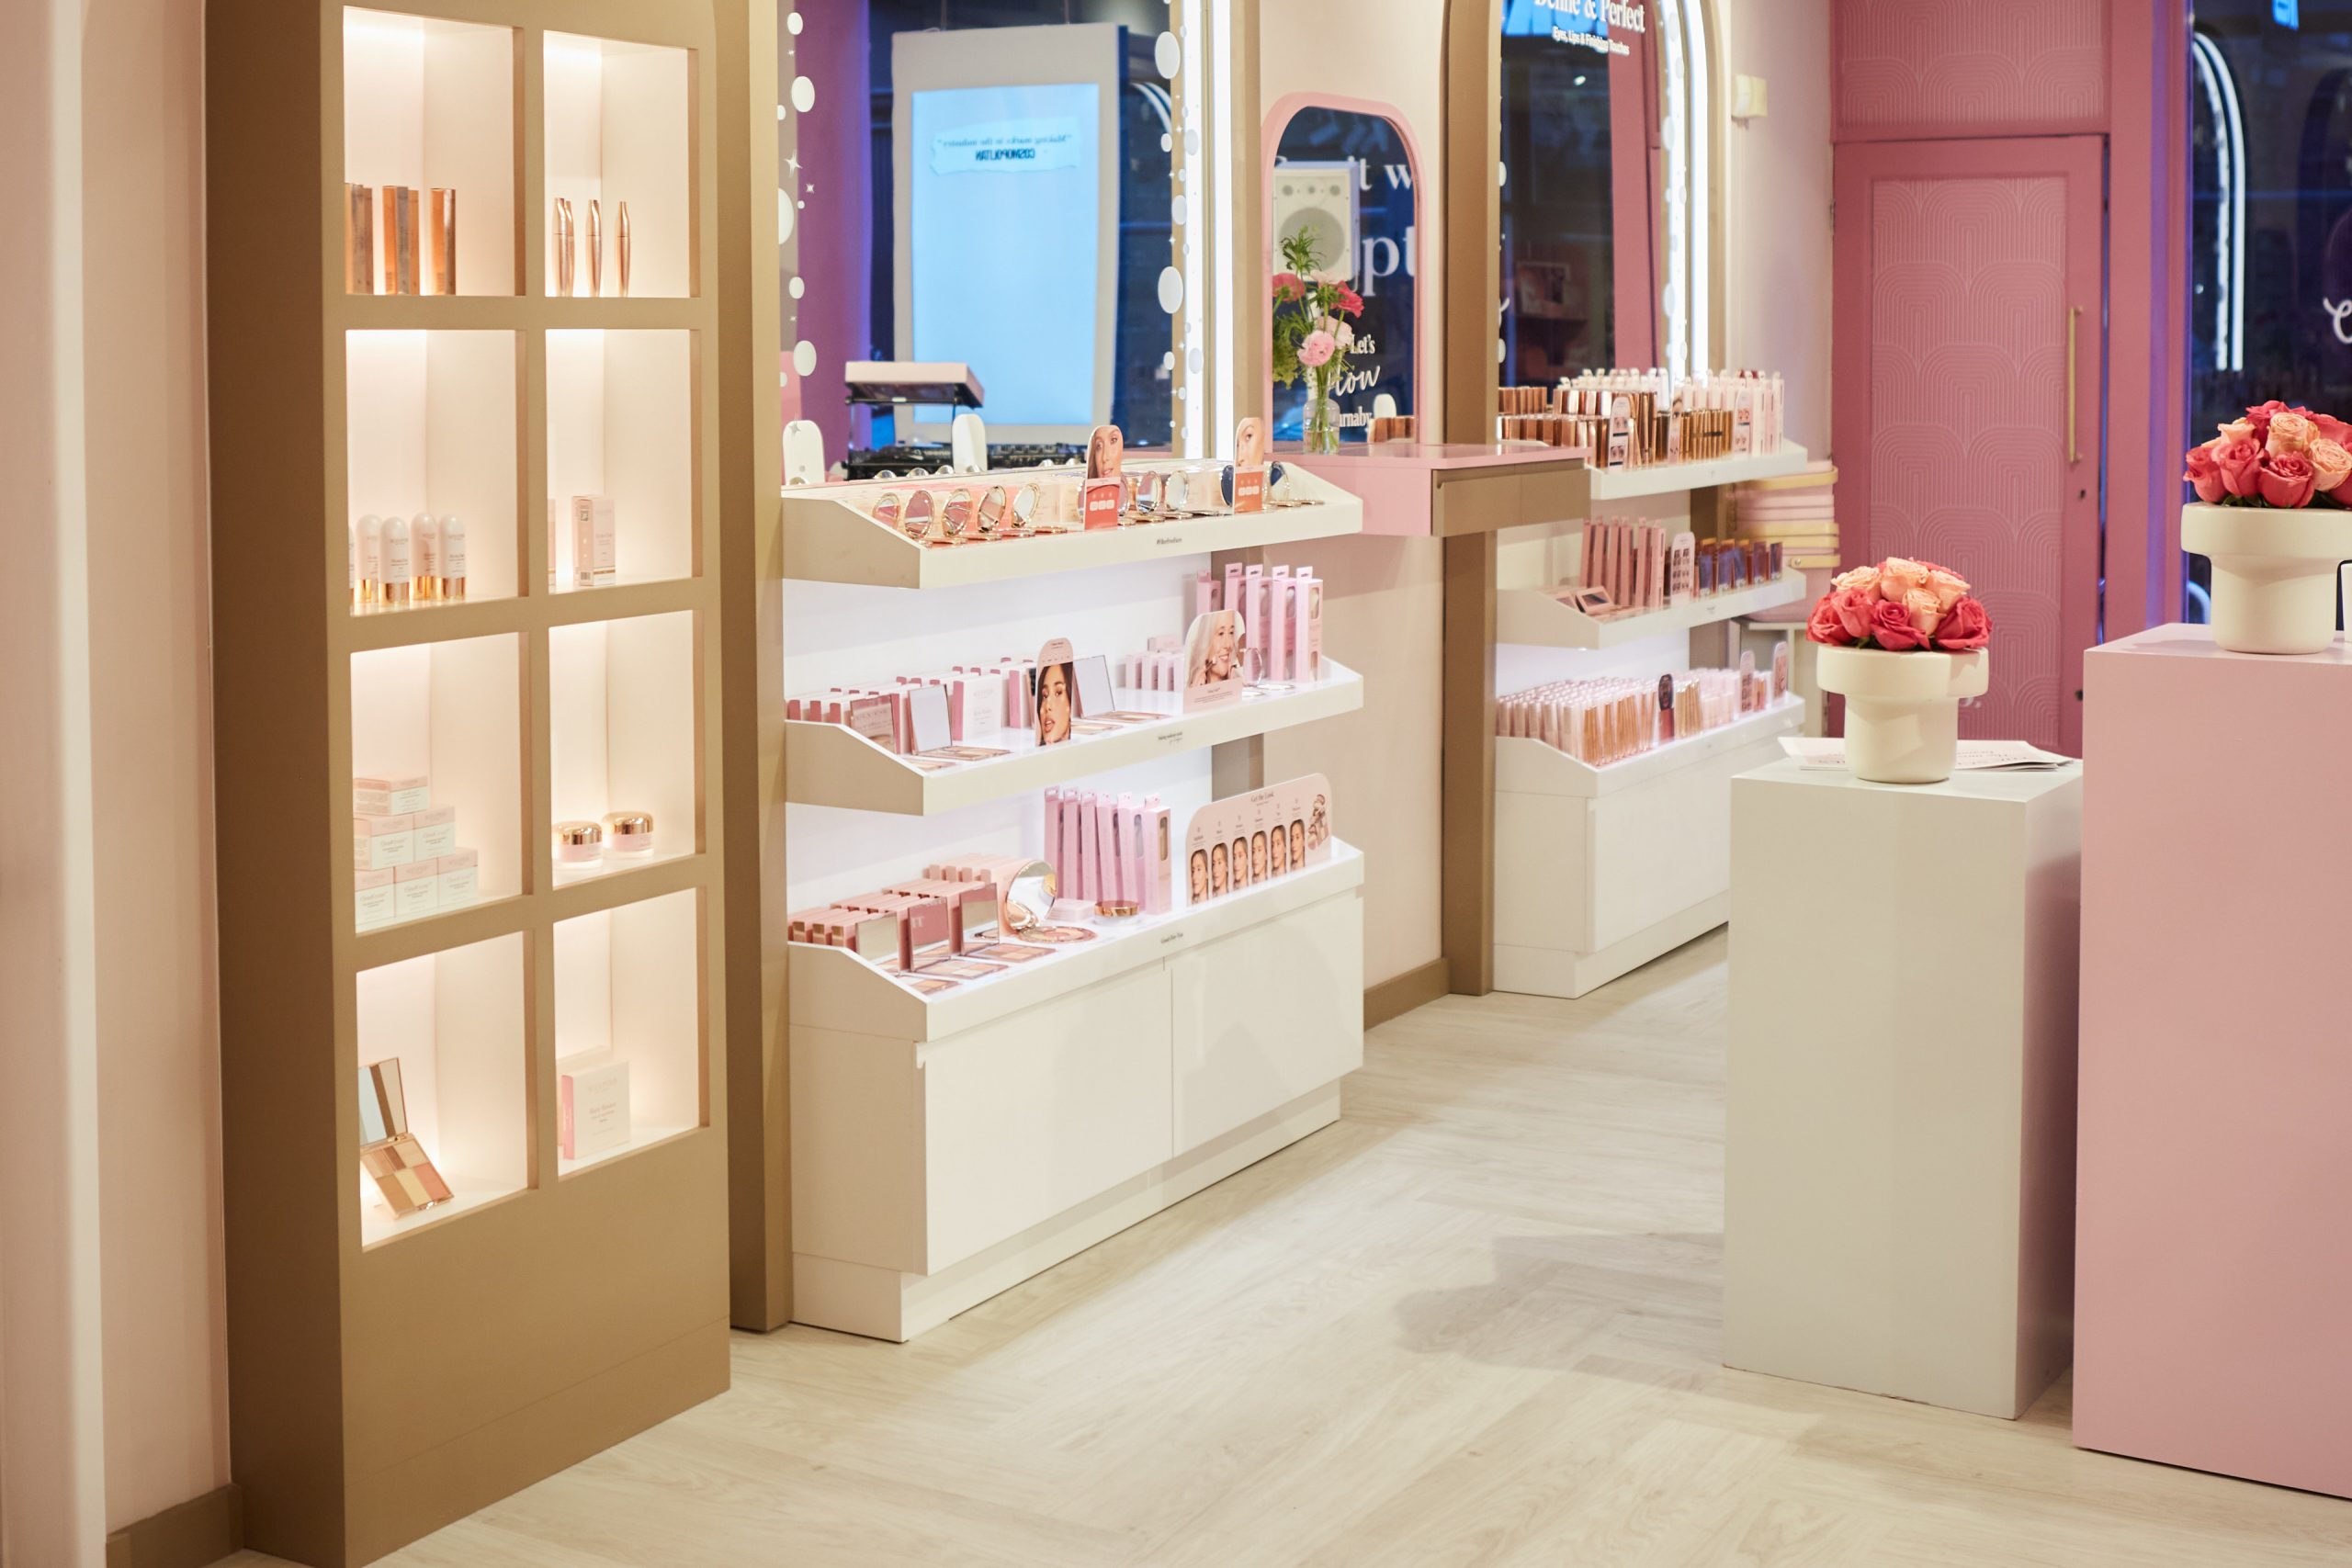 In Pictures: Sculpted by Aimee opens first London flagship ...